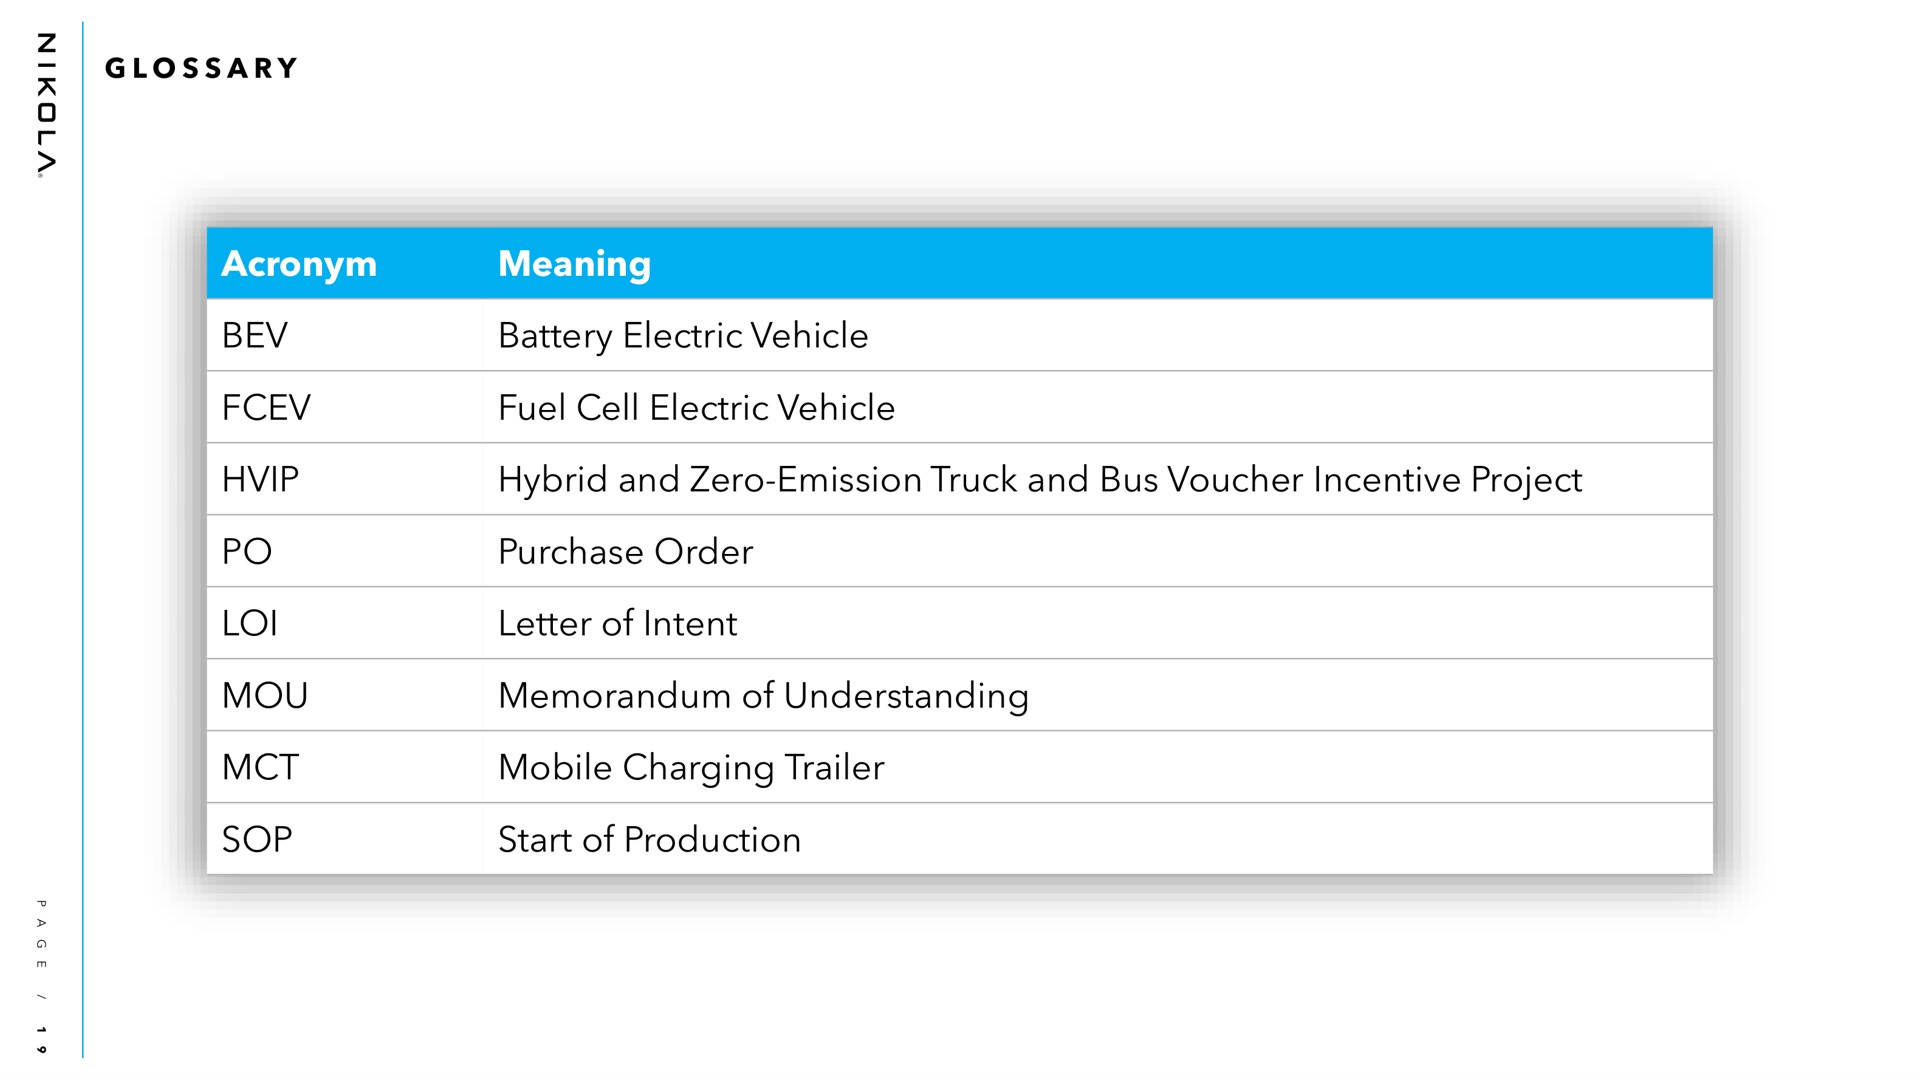 a acronym meaning battery electric vehicle fuel cell electric vehicle hybrid and zero emission truck and bus voucher incentive project purchase order letter of intent memorandum of understanding mobile charging trailer start of production mou sop glossary | Nikola